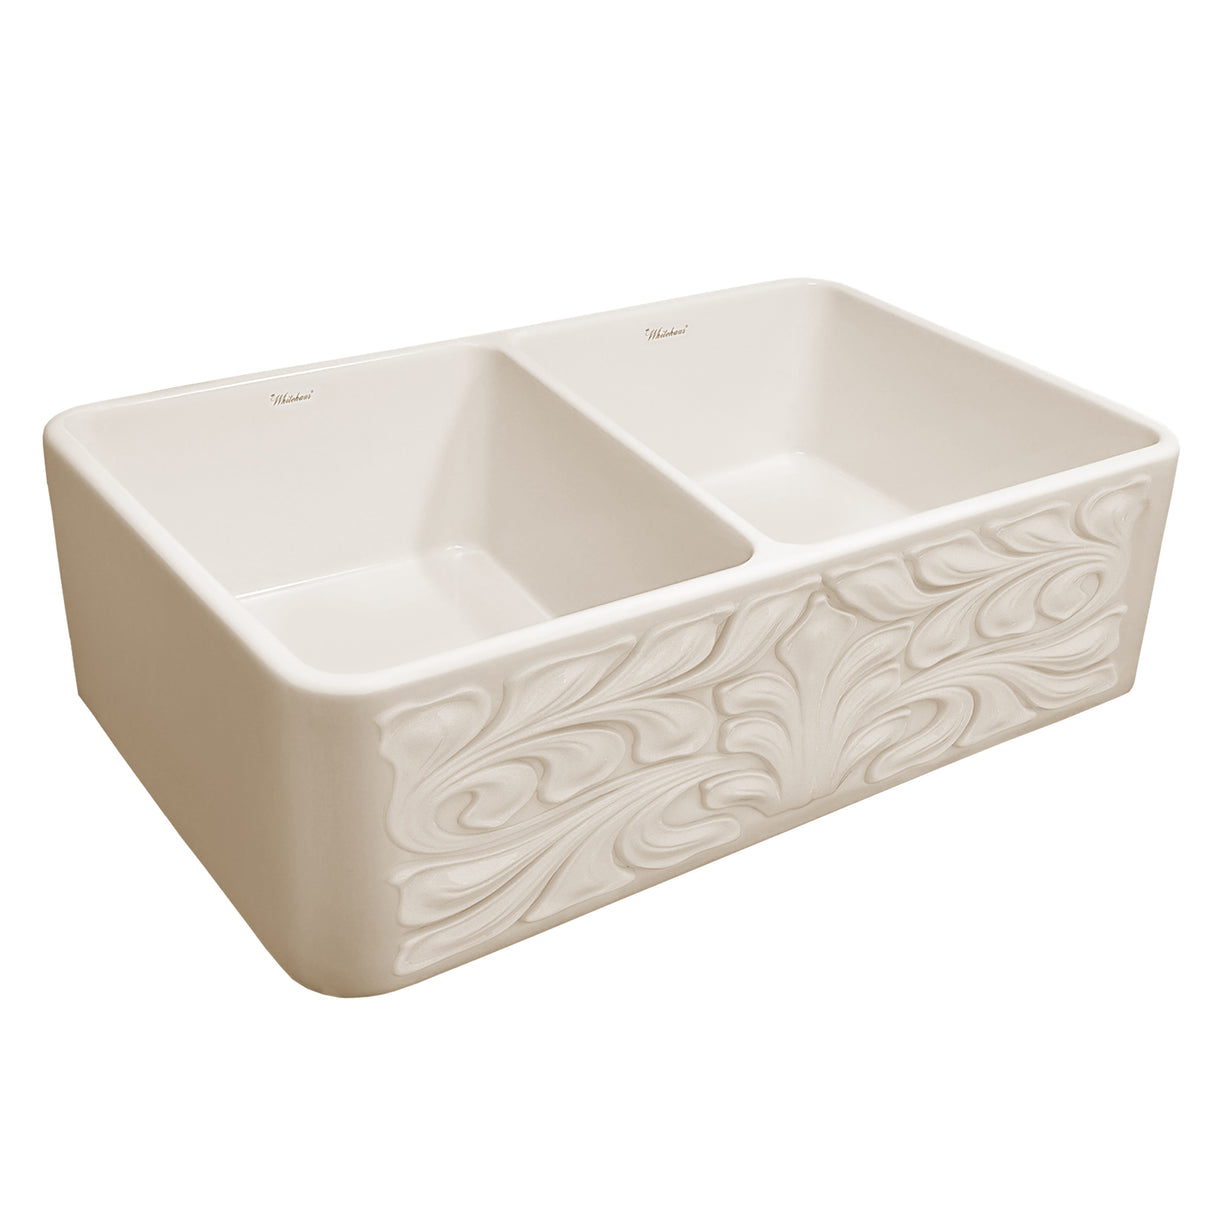 Farmhaus Fireclay Reversible Double Bowl Sink with a Gothichaus Swirl Design Front Apron on One Side, and a Fluted Front Apron on the Opposite Side.